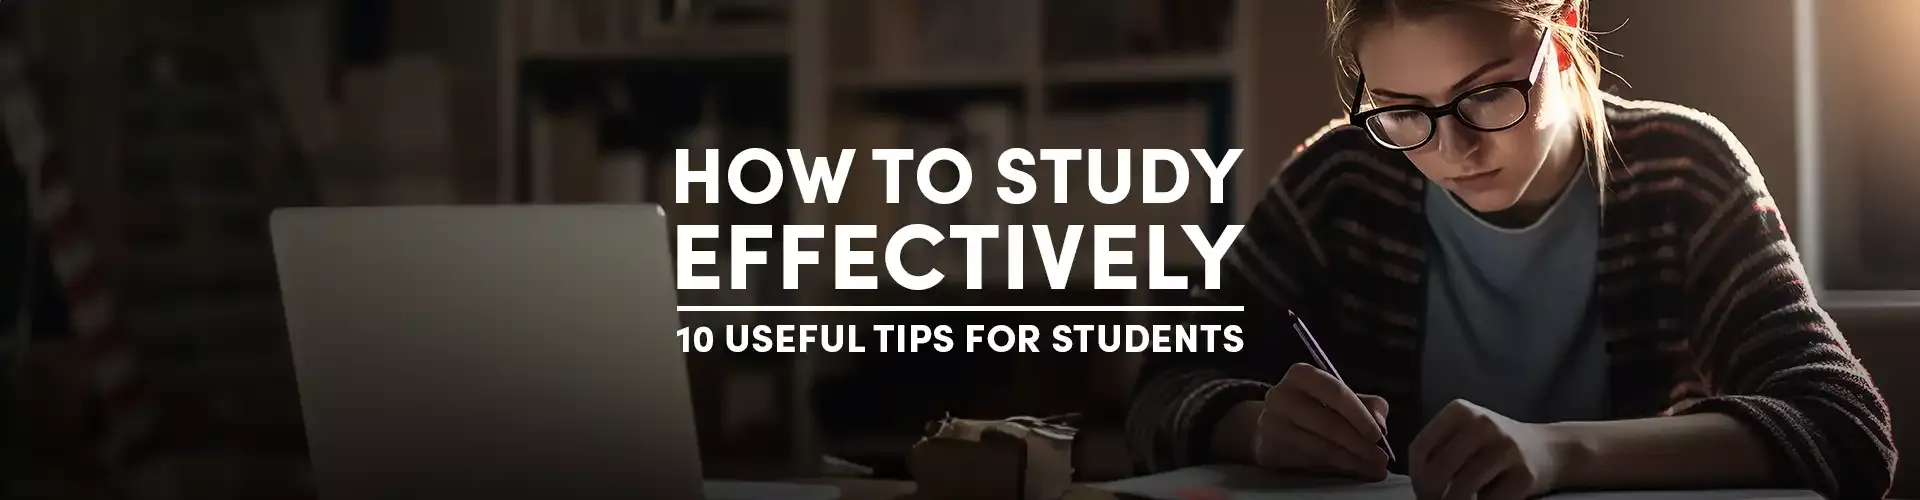 How to Study Effectively: 10 Useful Tips for Students